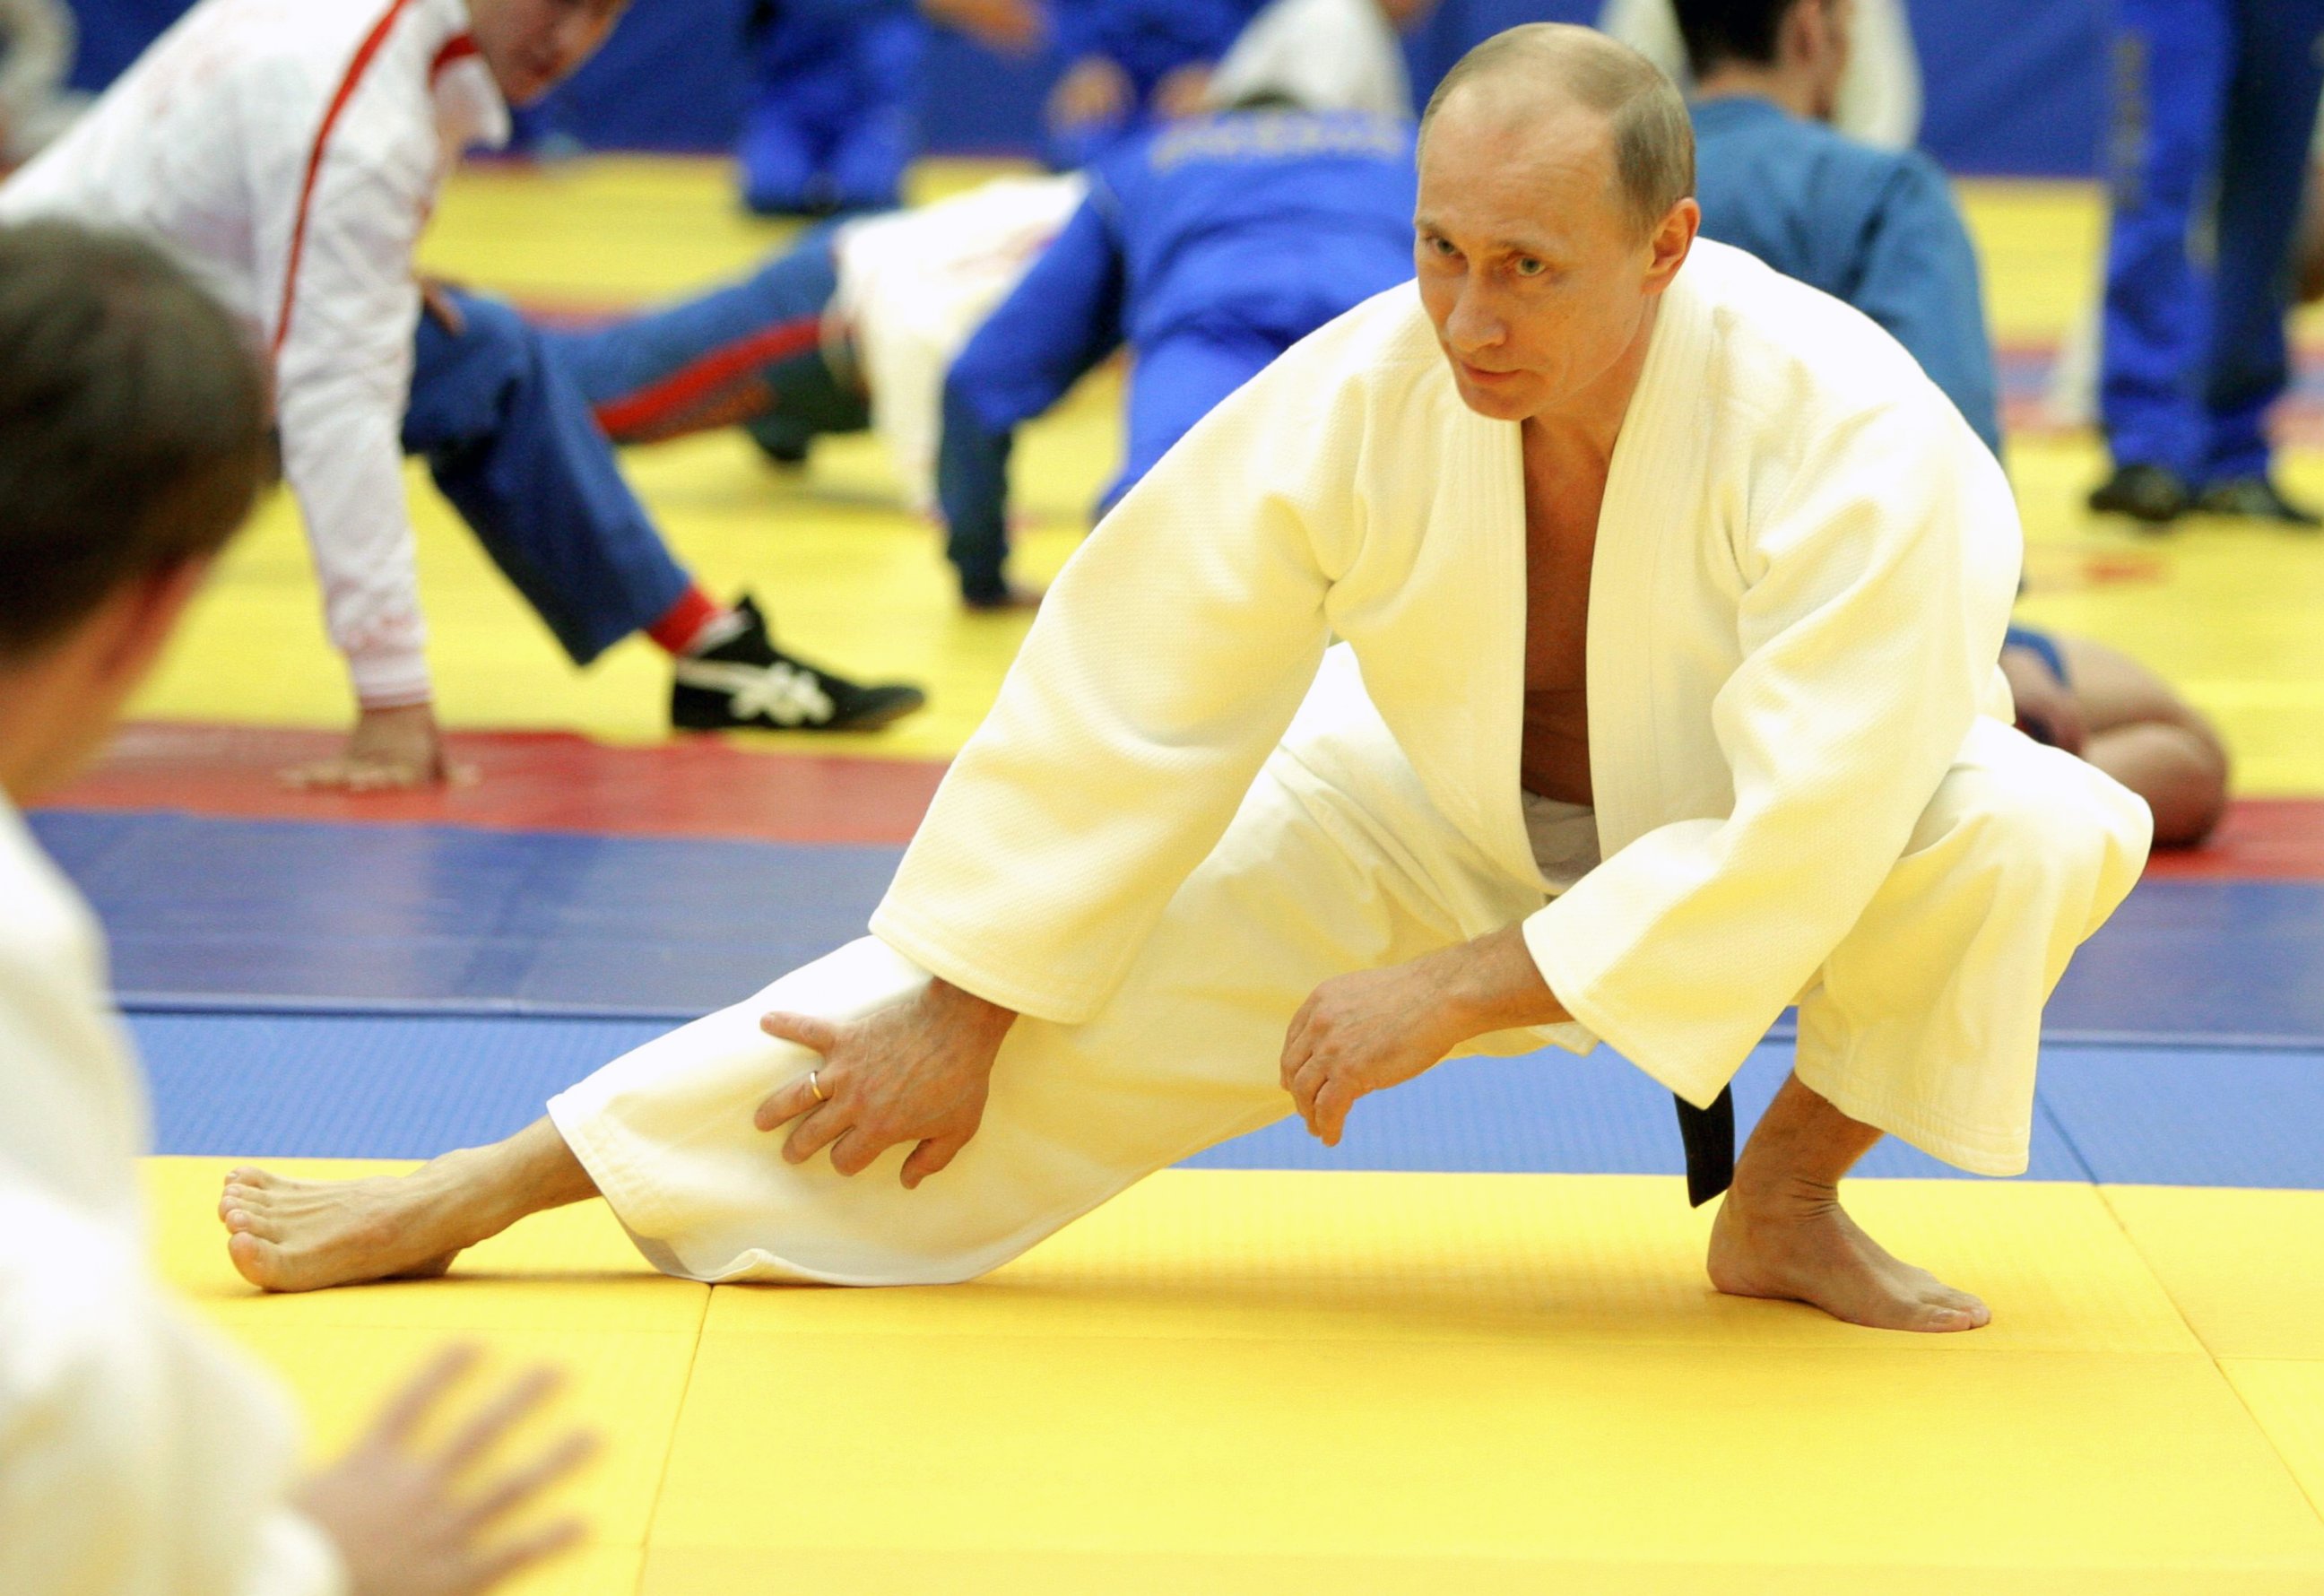 PHOTO: Russia's Prime Minister Vladimir Putin takes part in a judo training session at the Moscow sports complex in St. Petersburg, Dec. 22, 2010. 